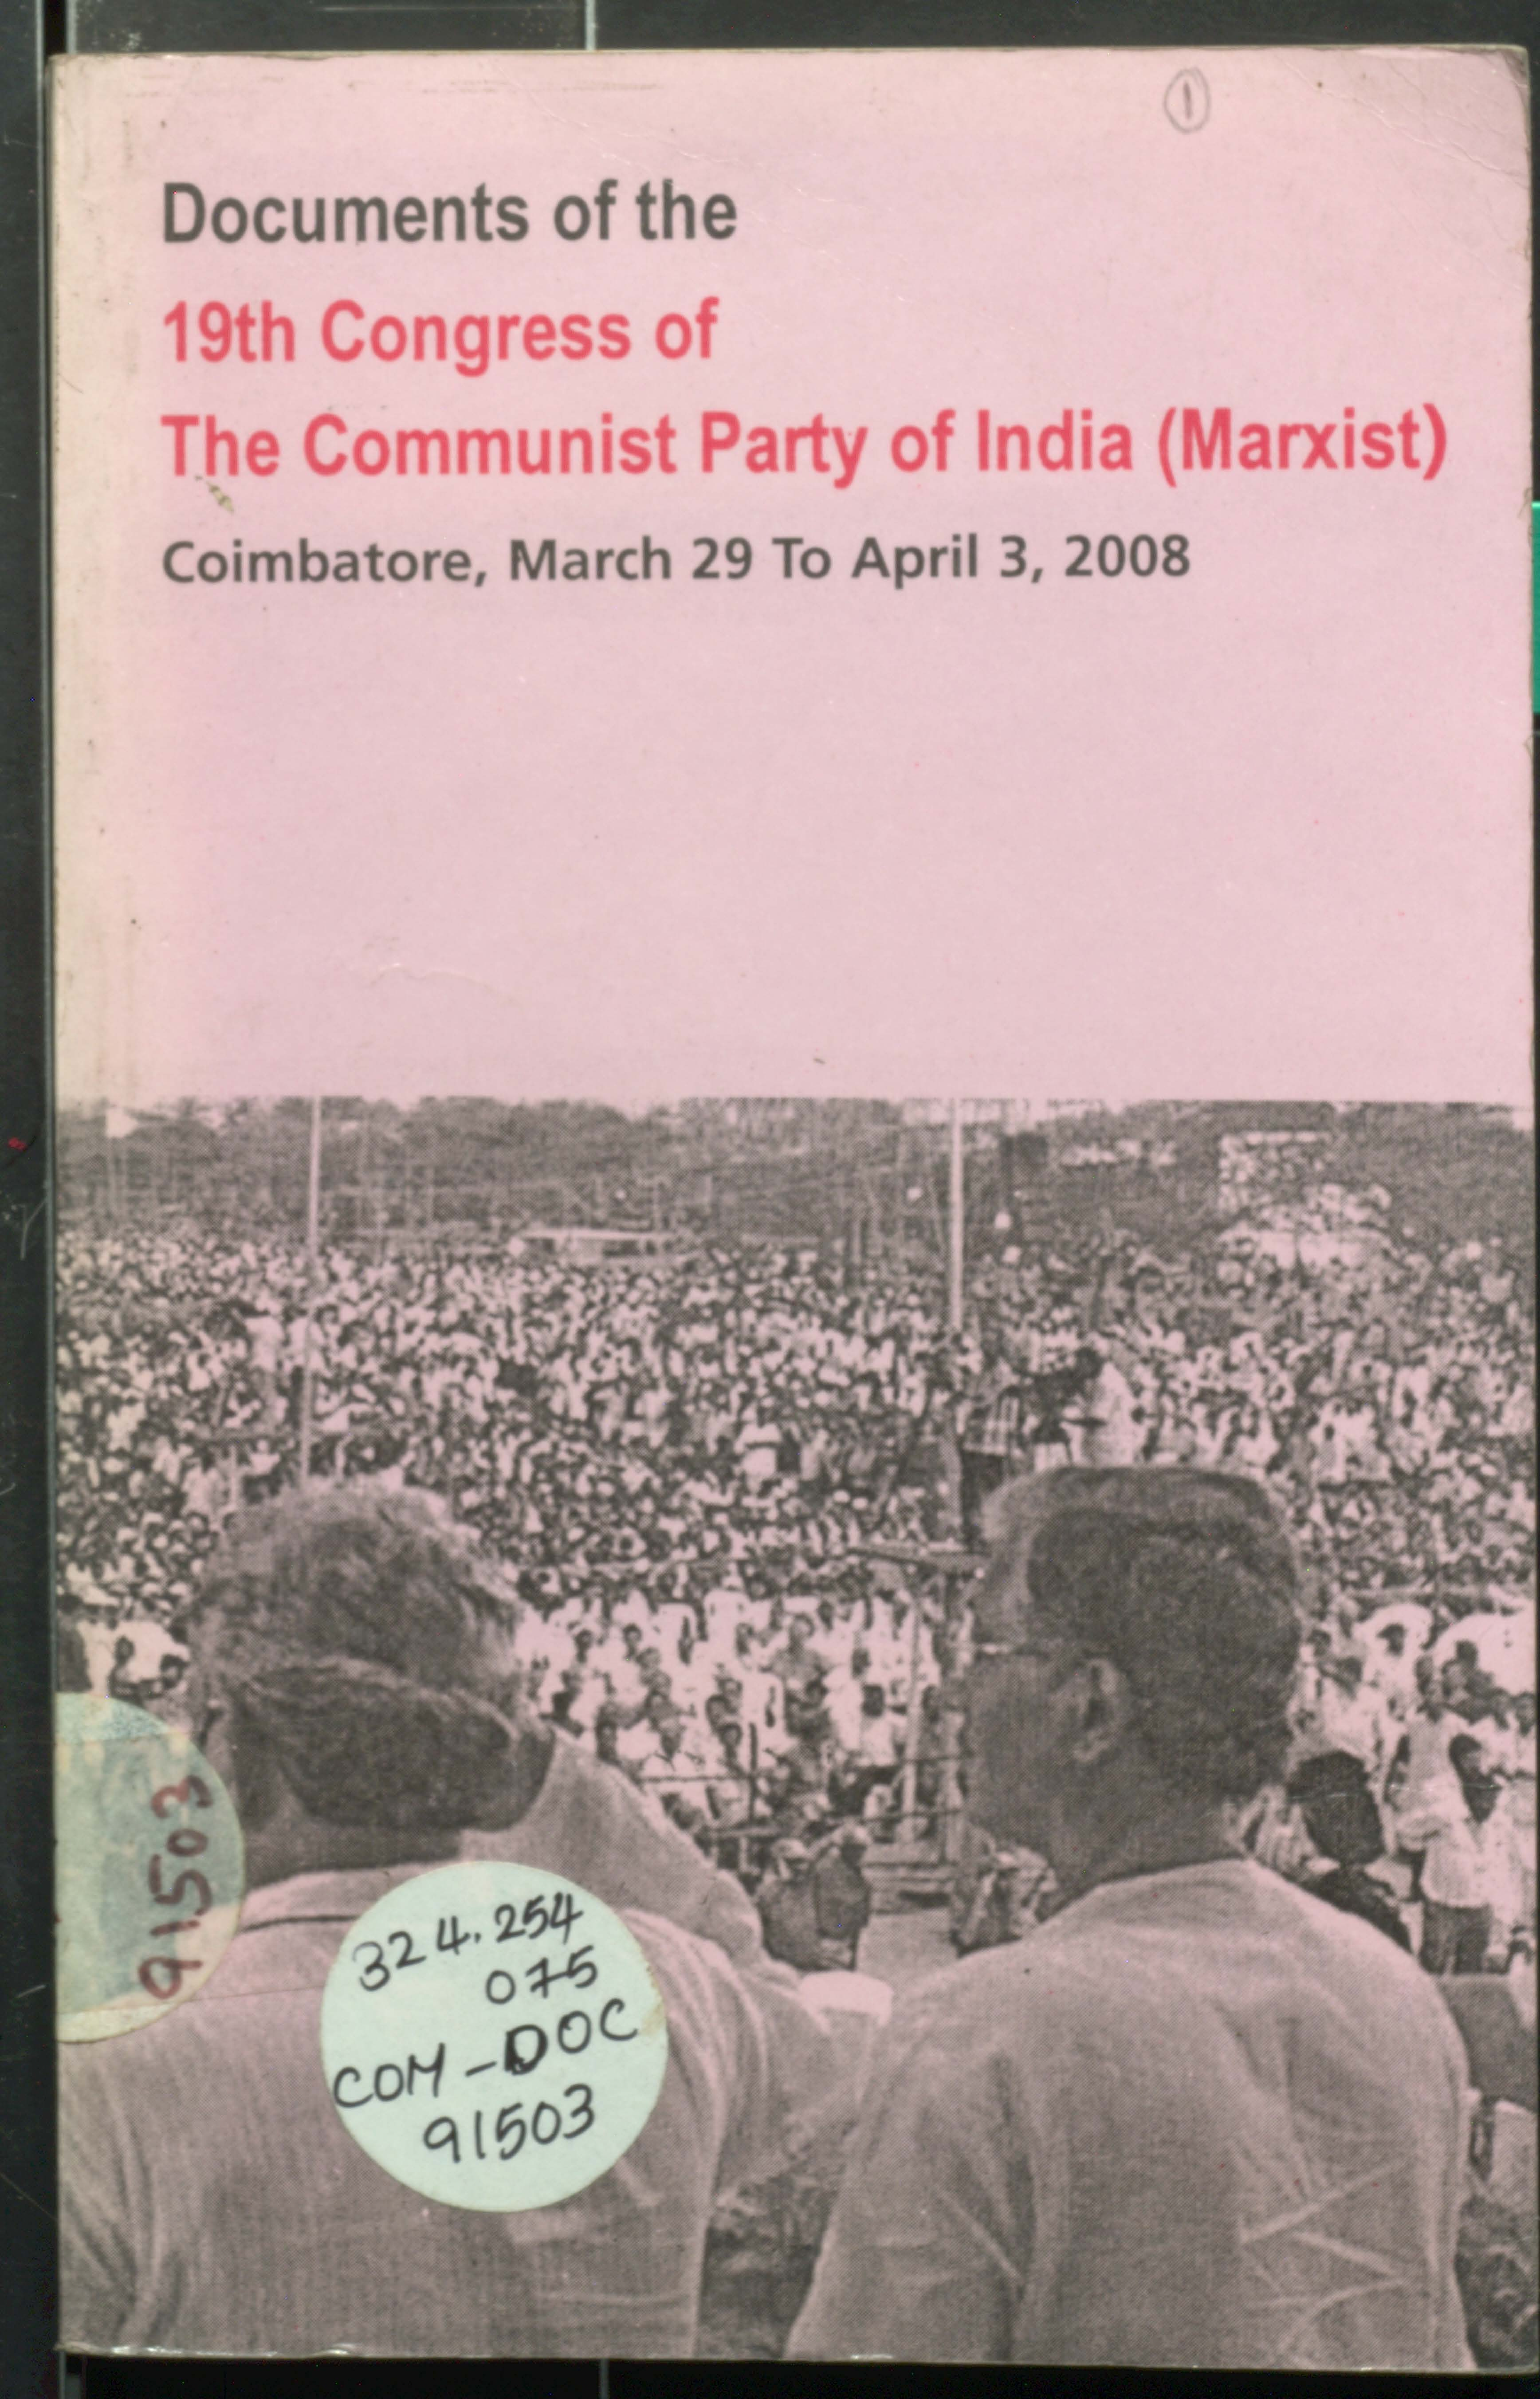 DOCUMENTS OF THE  19TH CONGRESS OF THE COMMUNIST PSRTY OF INDIA (marxist coimbatore, march 29 to april 3, 2008)